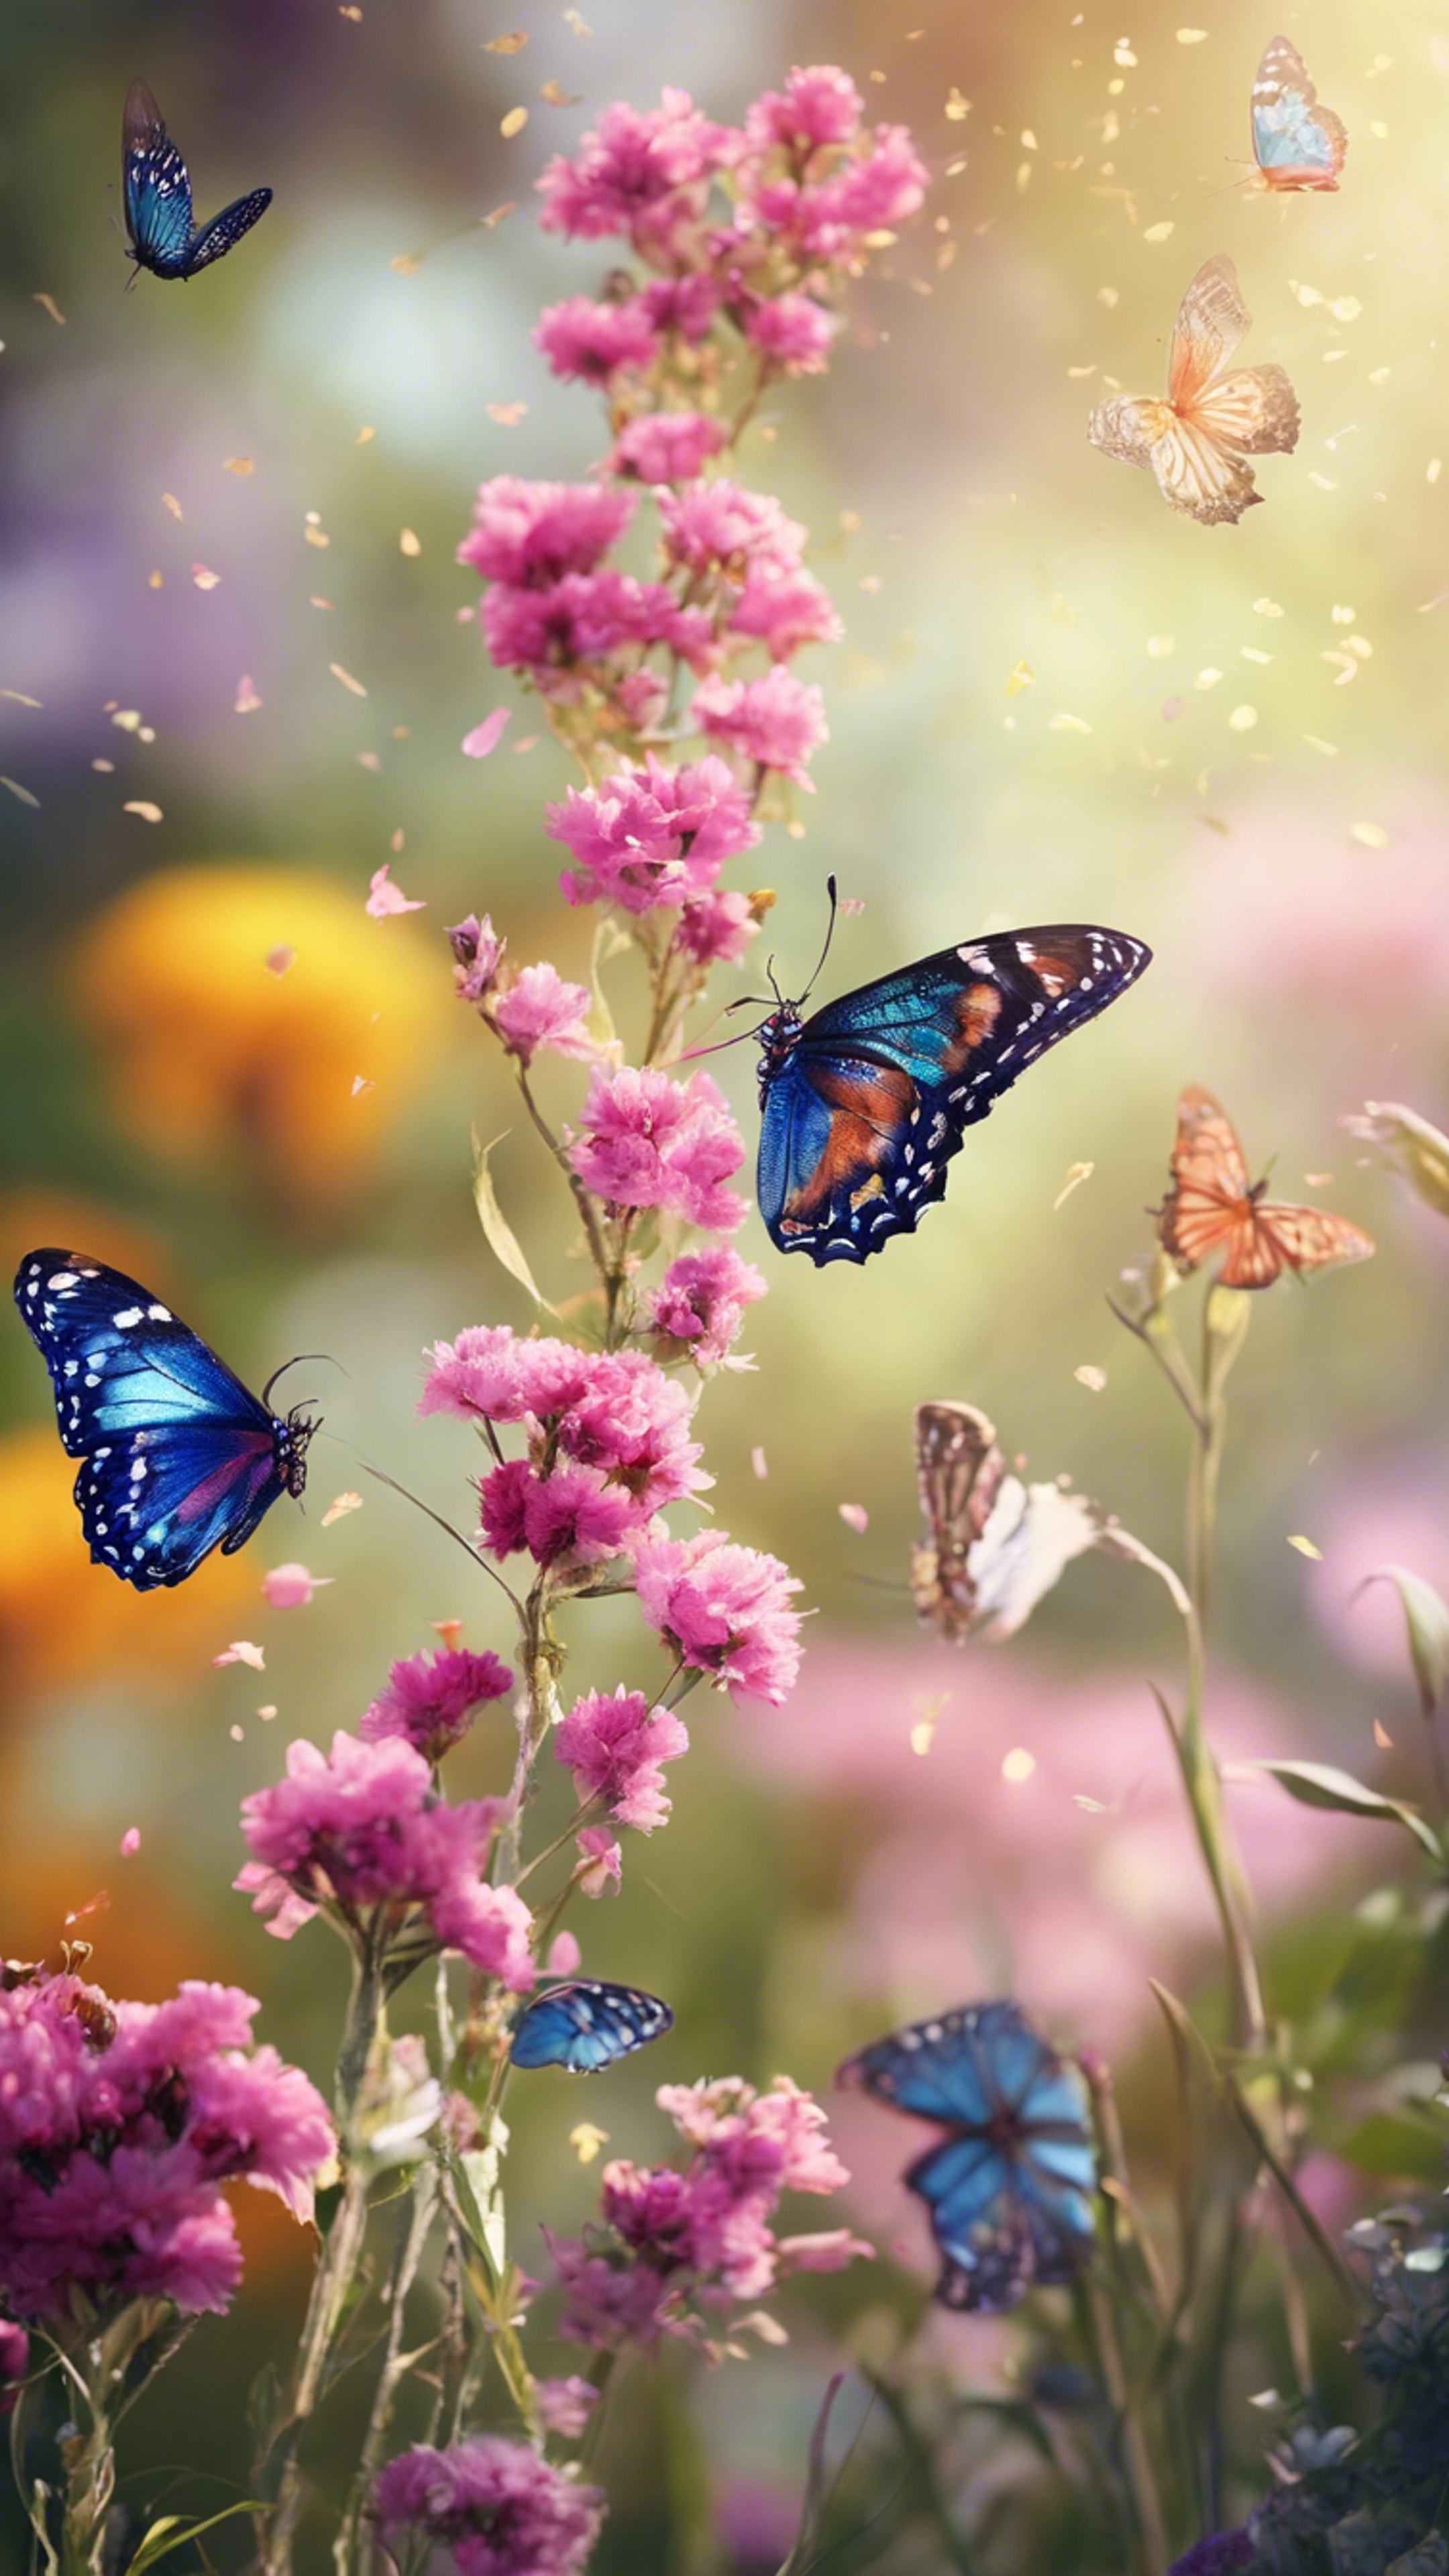 A peaceful butterfly garden teeming with a myriad of colorful butterflies fluttering among fragrant blooming flowers.壁紙[cb4da5152b8a44b391a6]